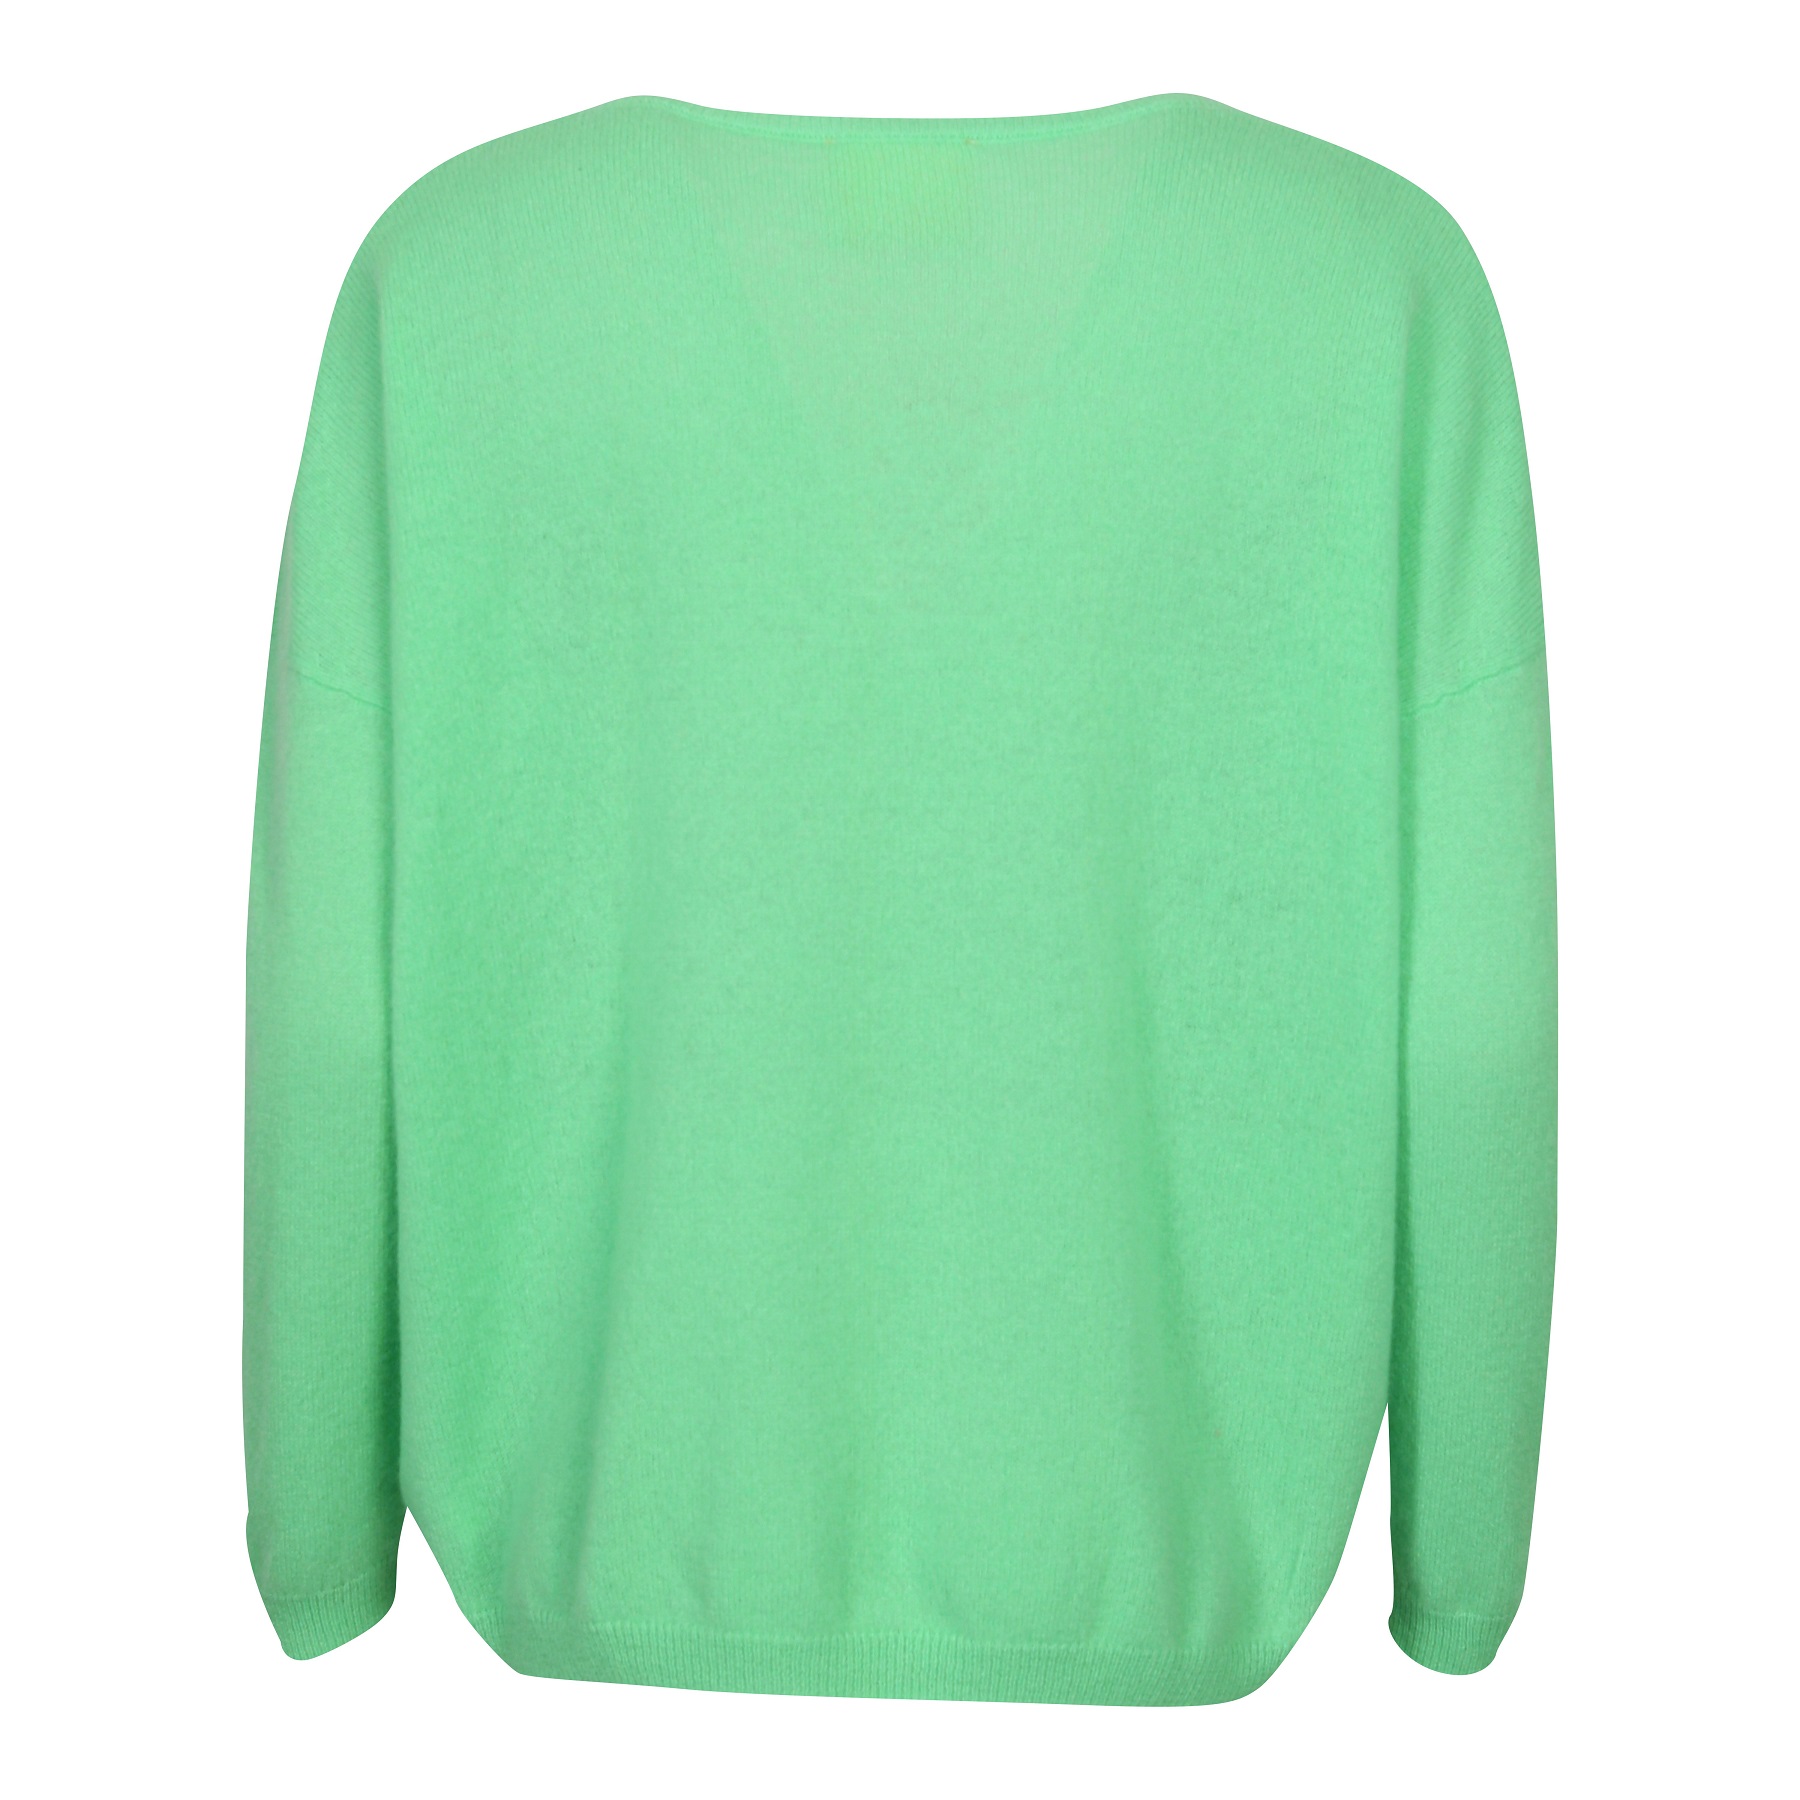 Absolut Cashmere Pullover Angele in Light Green M